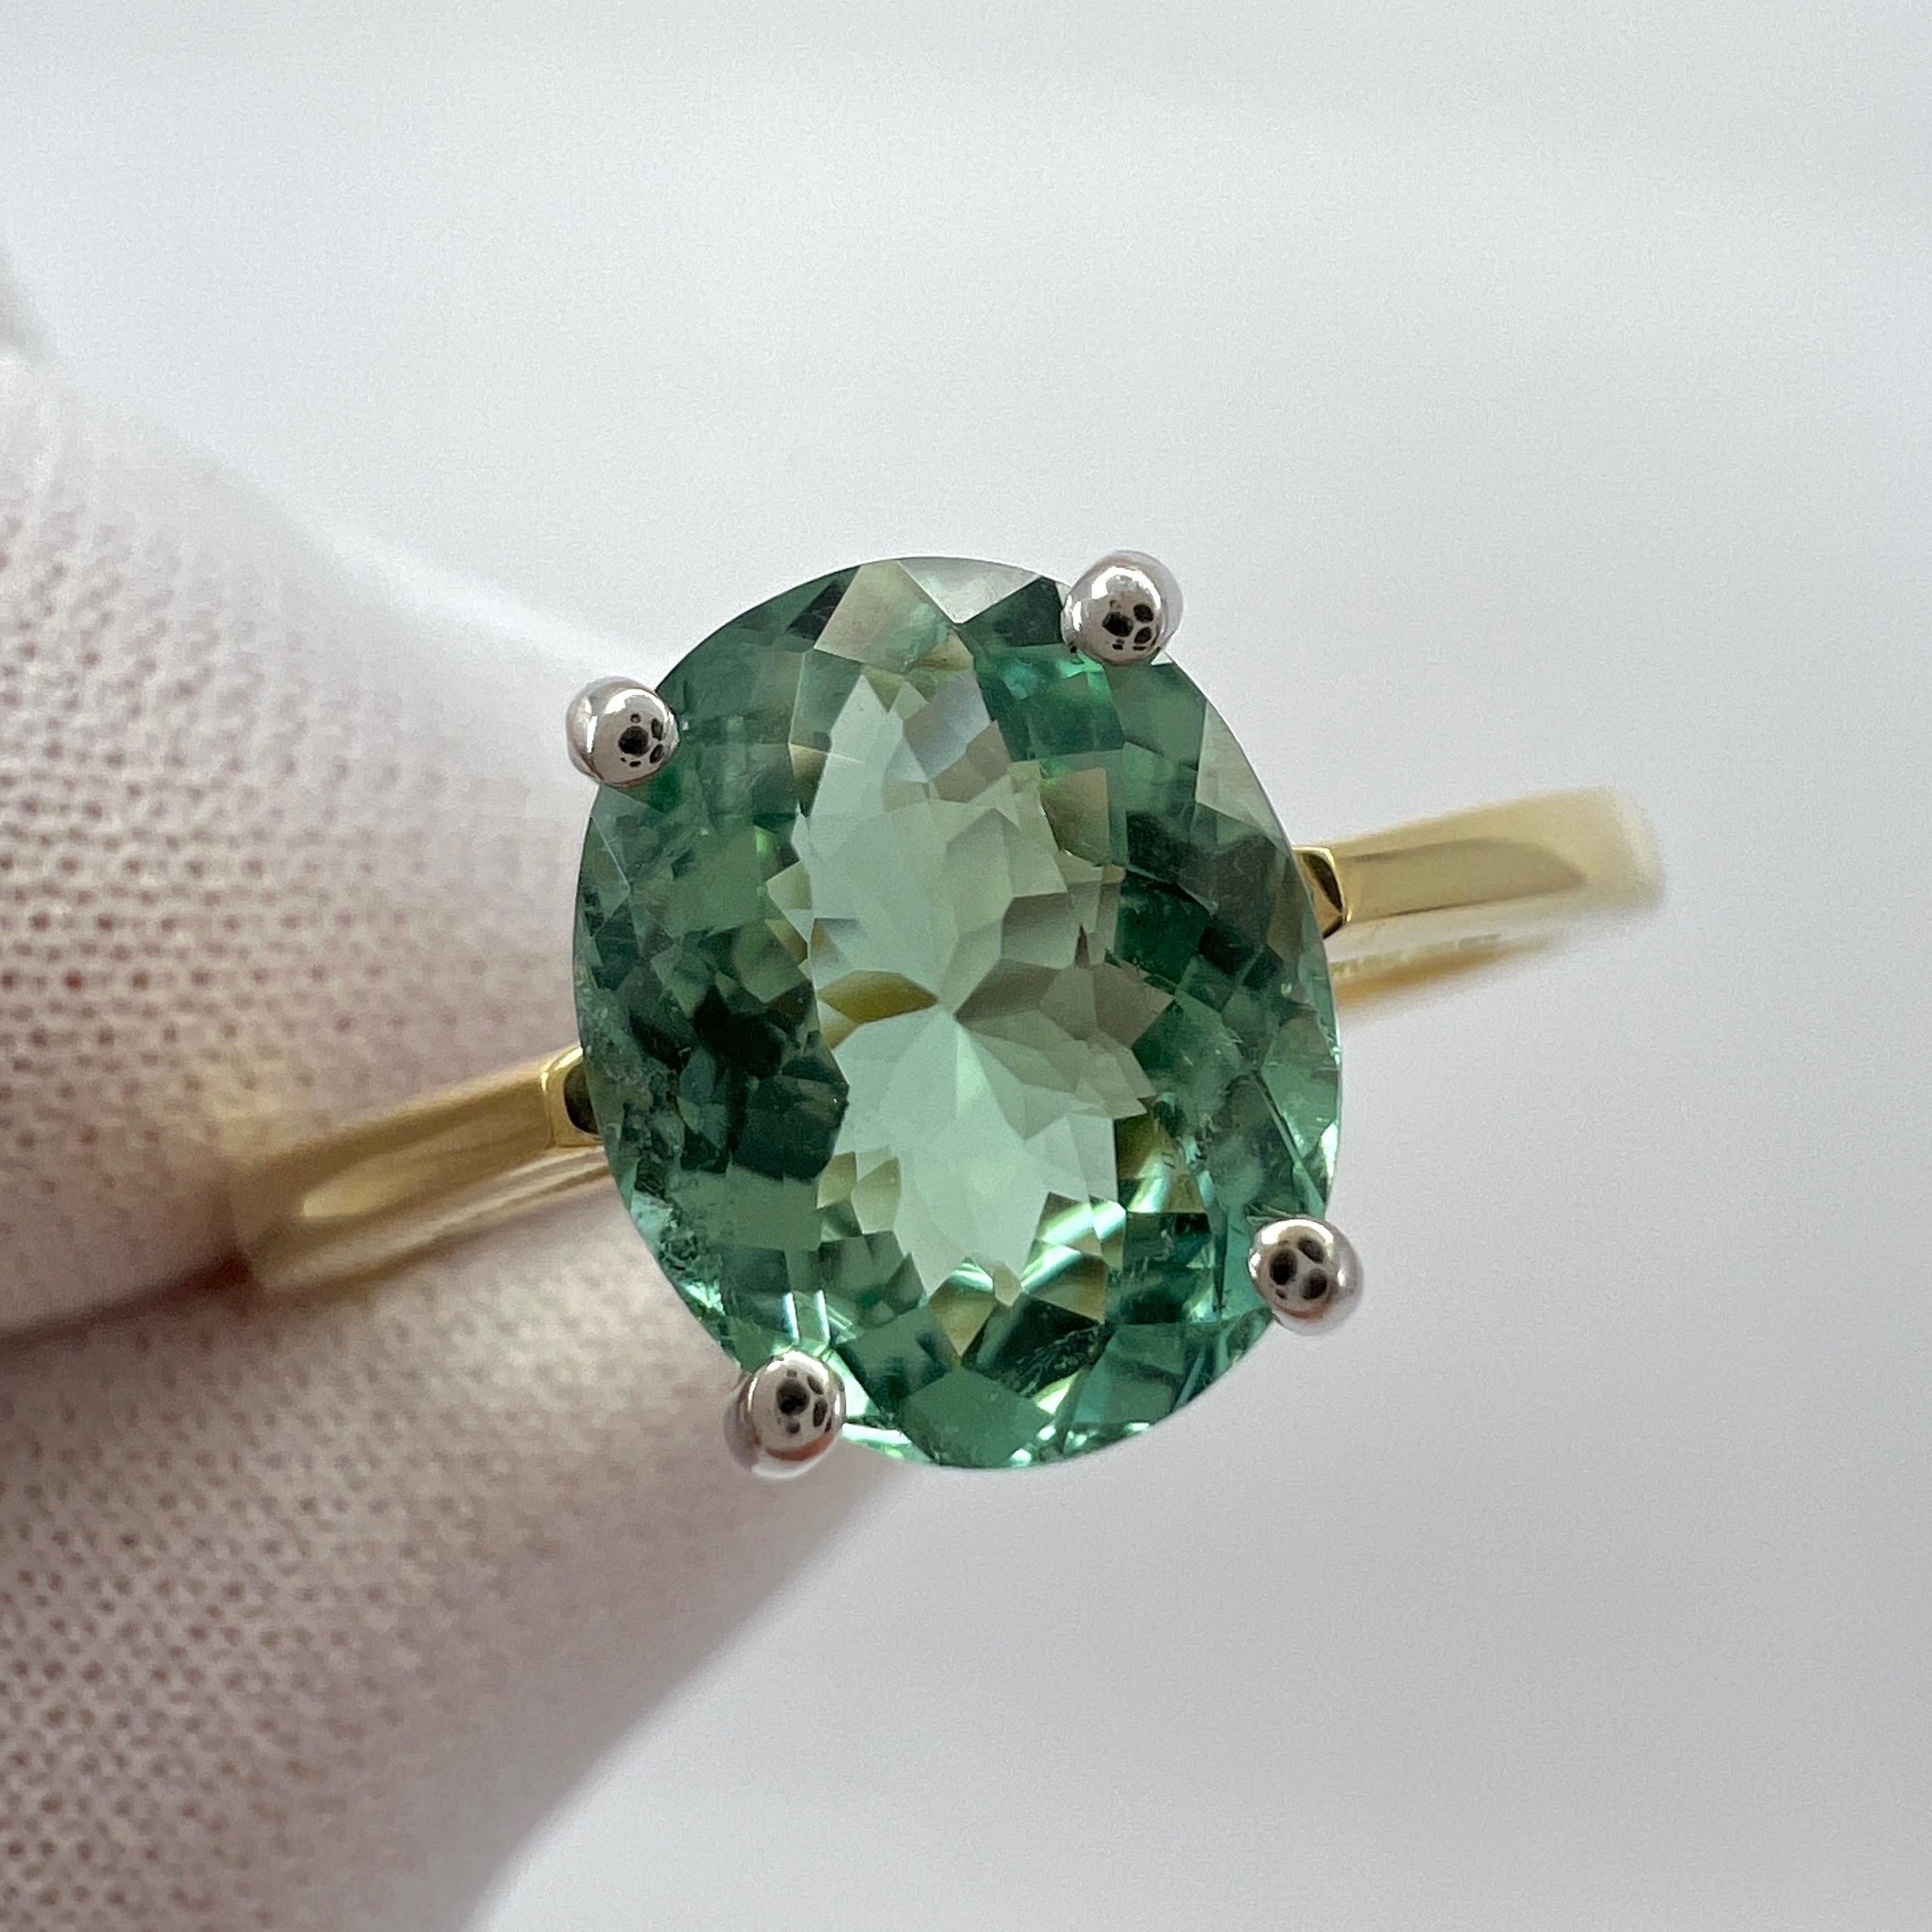 1.75ct Vivid Blue Green Tourmaline Oval Cut 18k Yellow White Gold Solitaire Ring For Sale 4